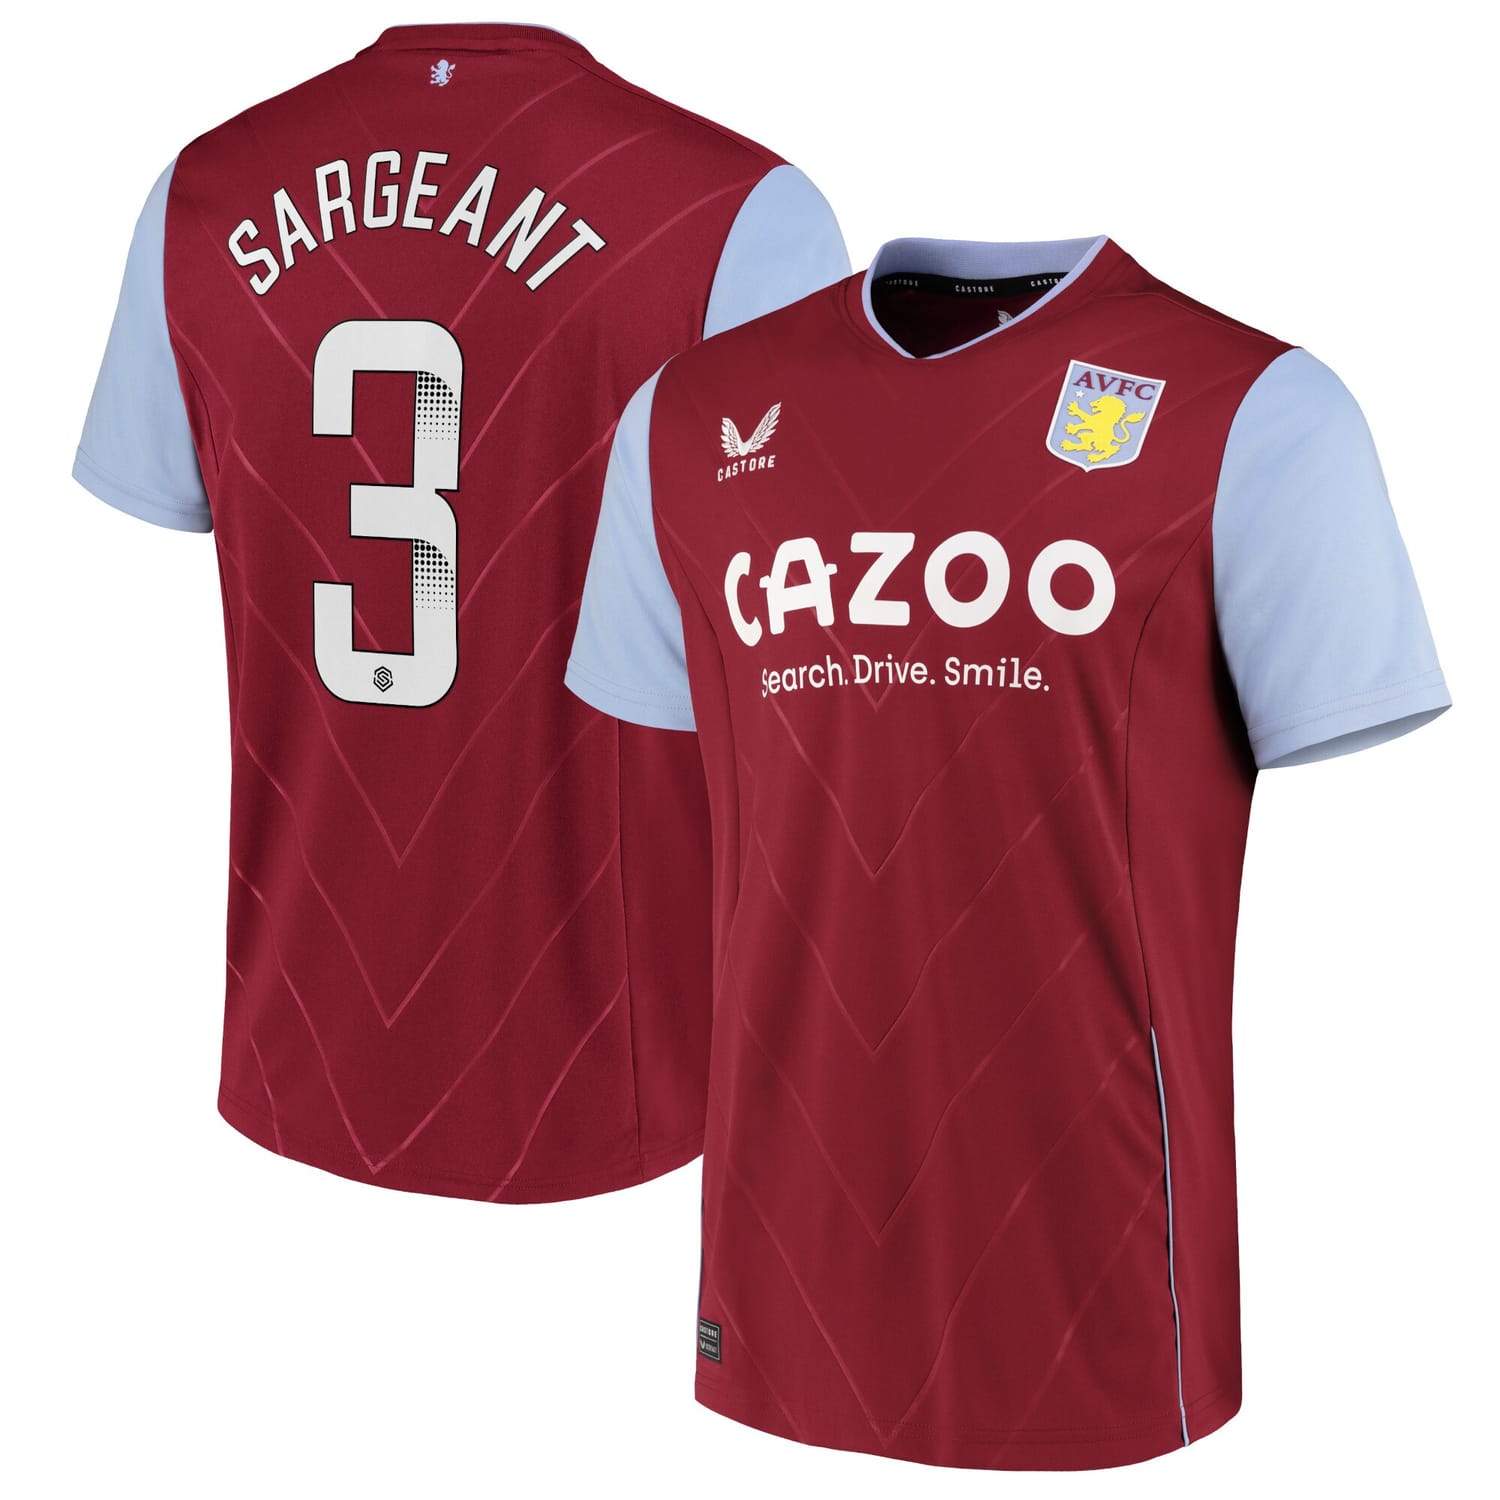 Premier League Aston Villa Home WSL Jersey Shirt 2022-23 player Meaghan Sargeant 3 printing for Men